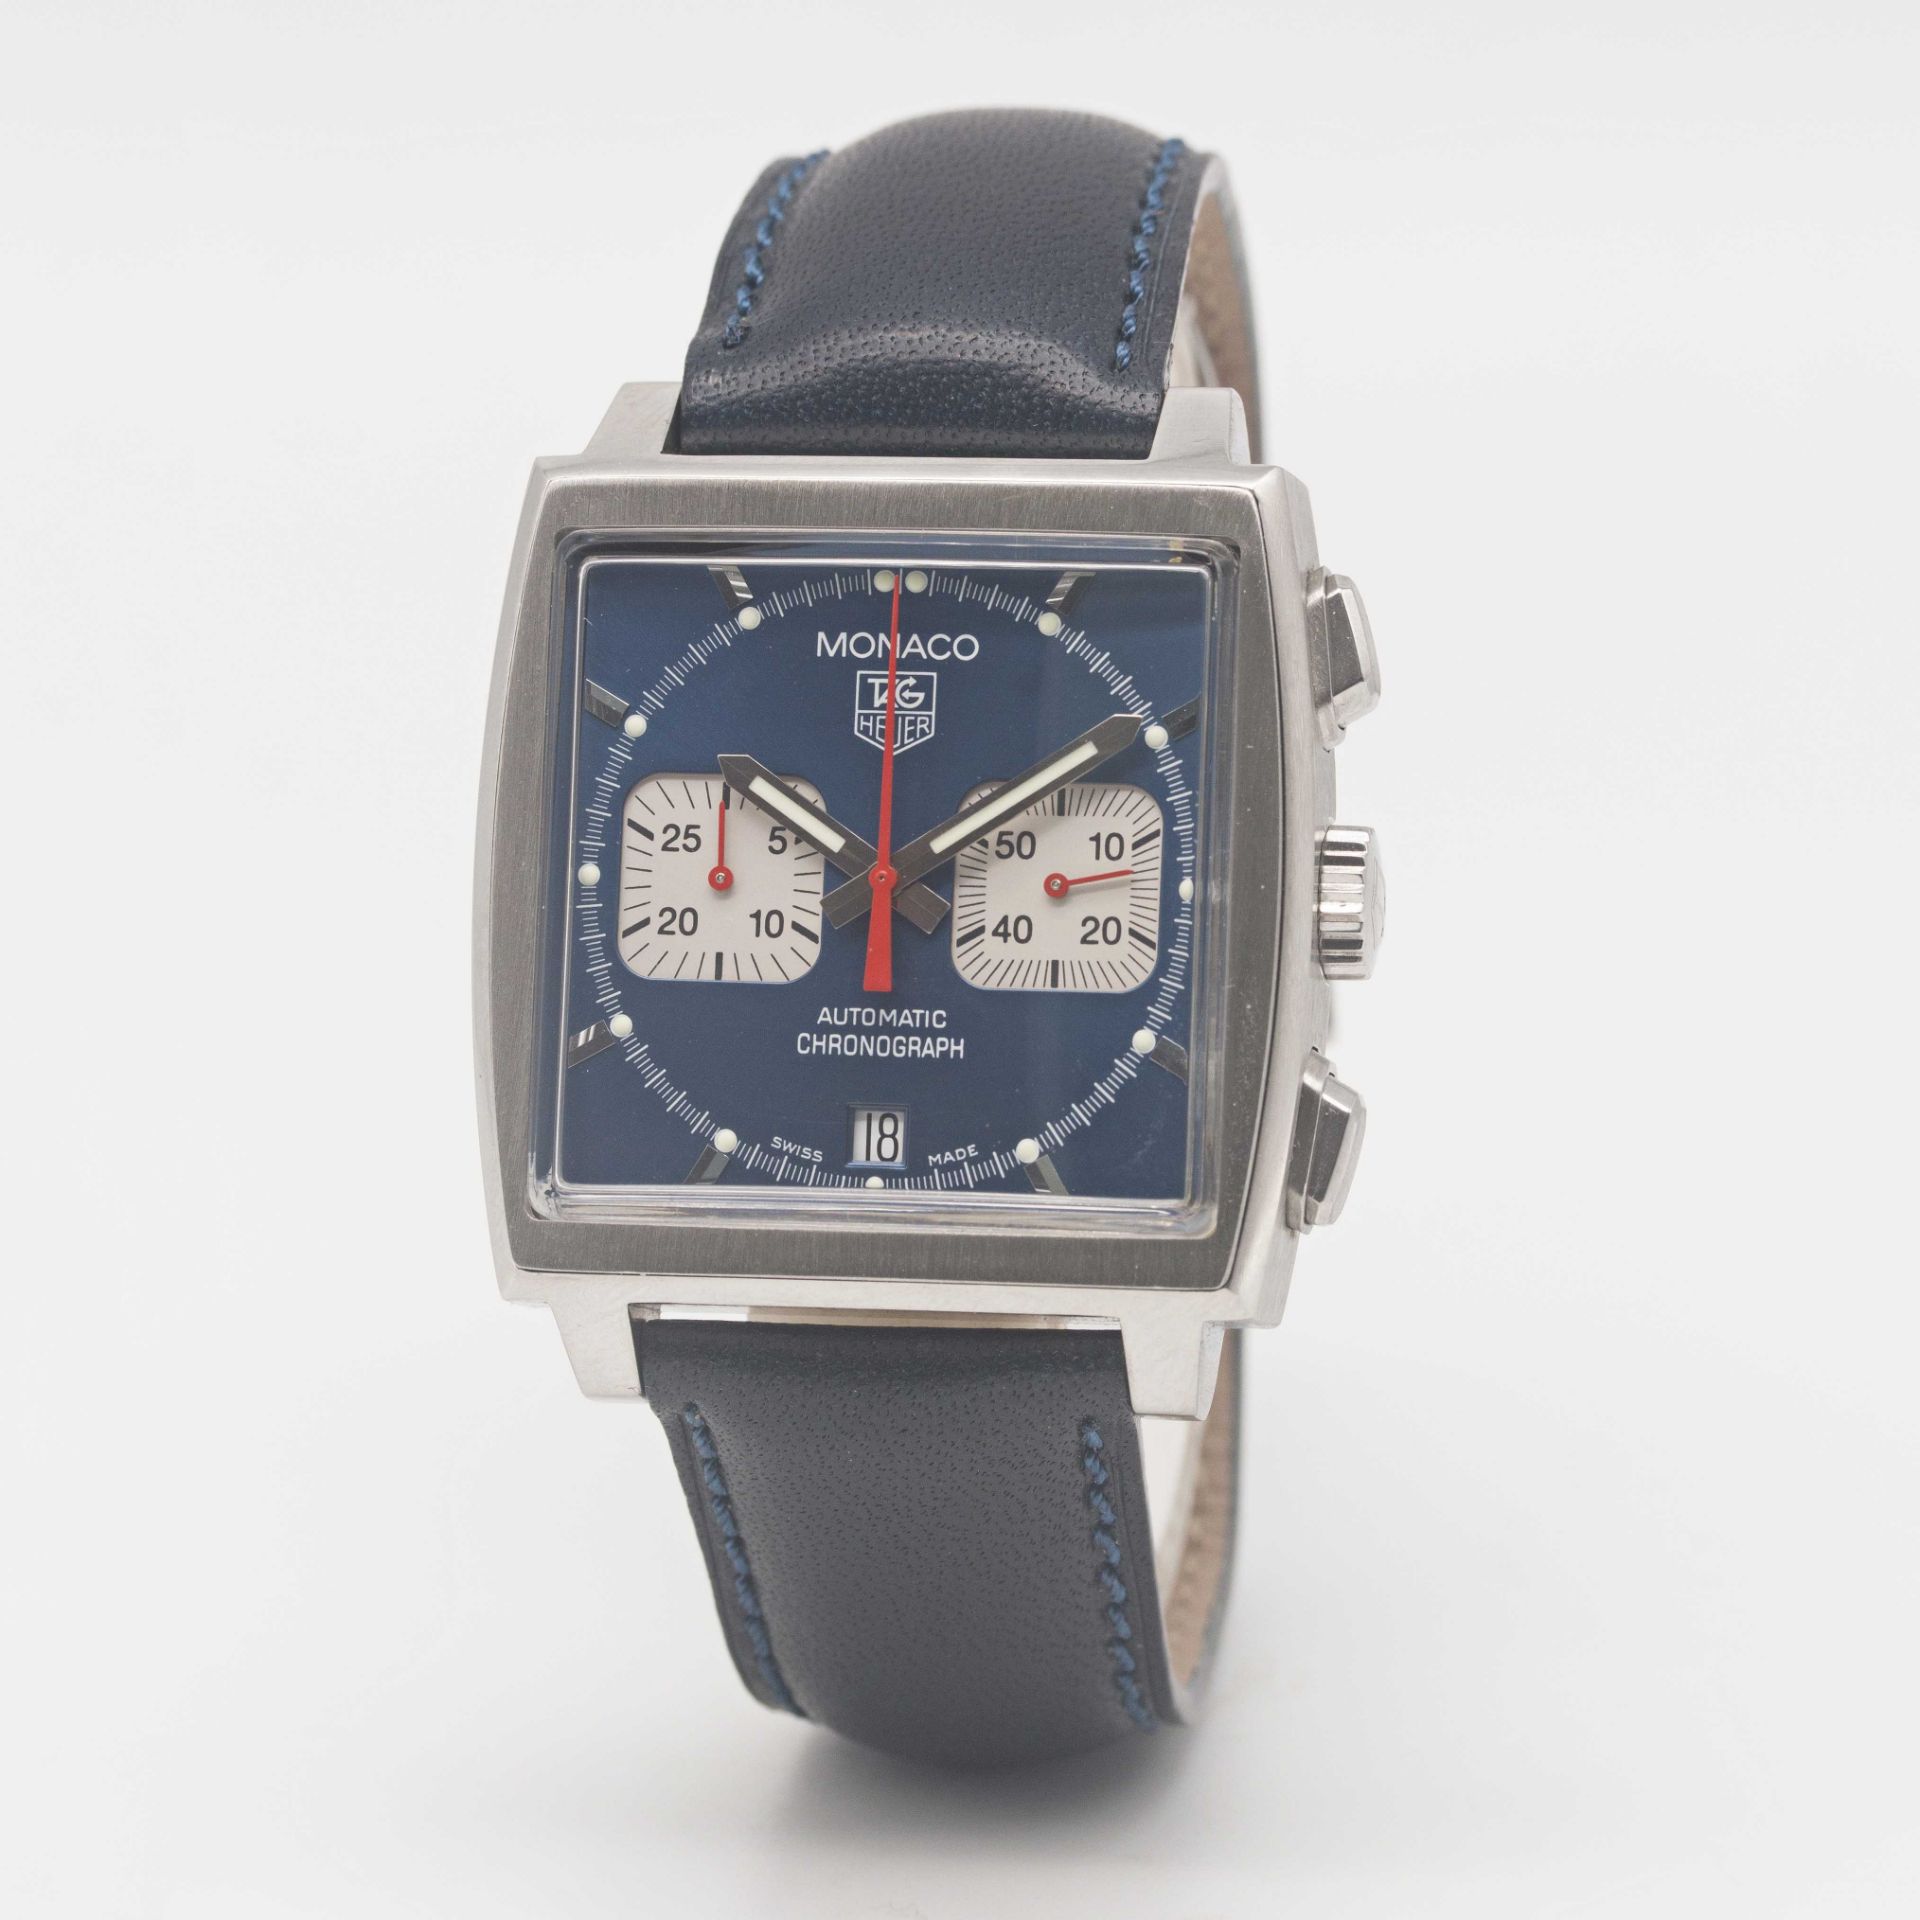 A GENTLEMAN'S STAINLESS STEEL TAG HEUER "STEVE MCQUEEN" MONACO AUTOMATIC CHRONOGRAPH WRIST WATCH - Image 4 of 10